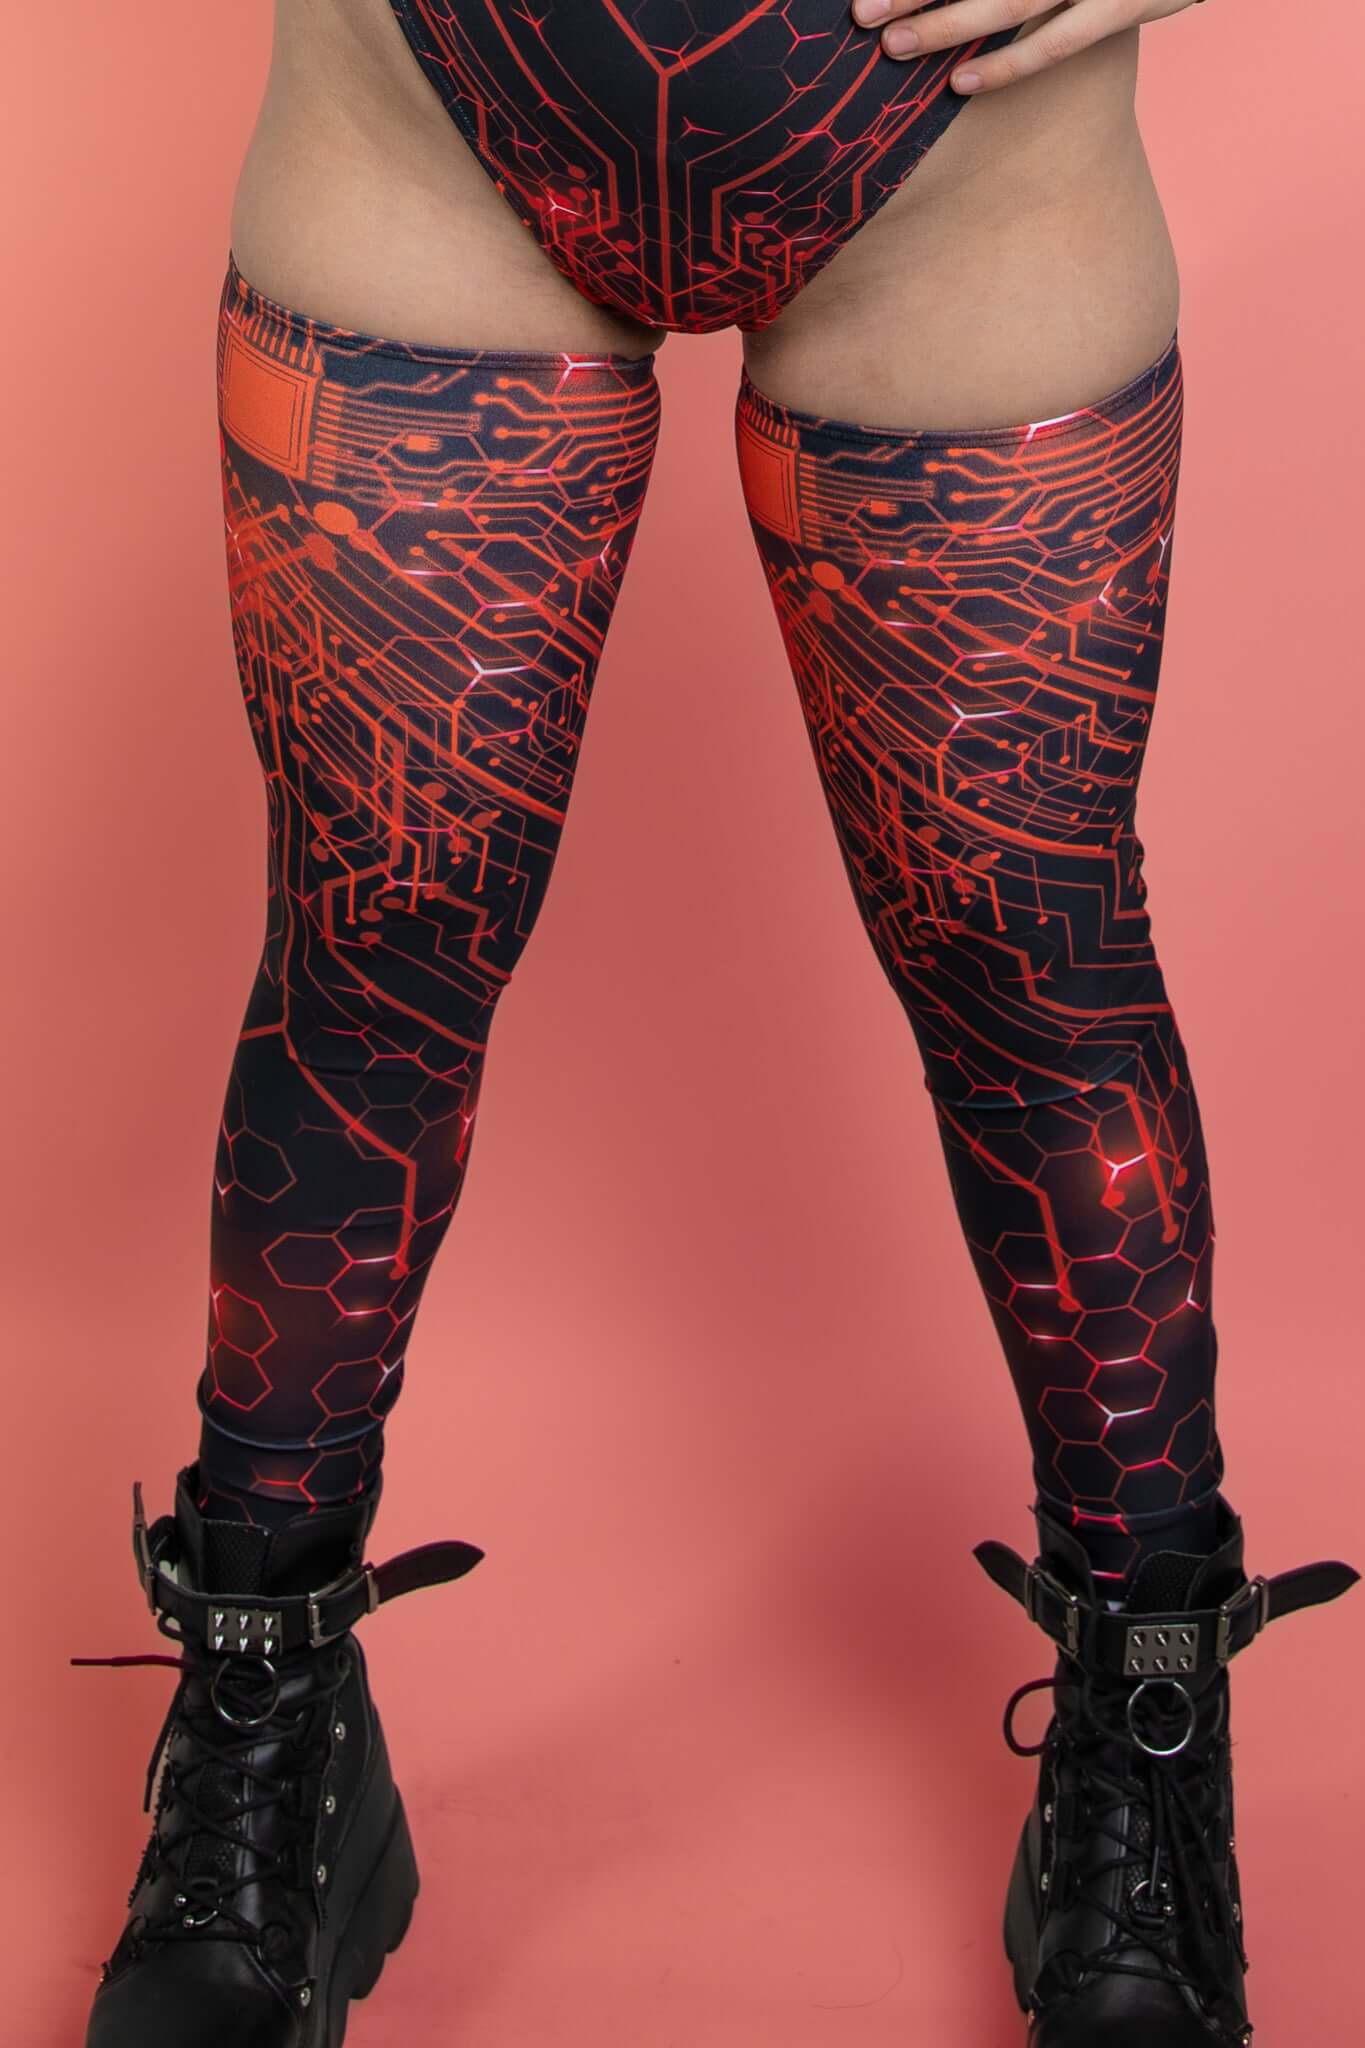 Freedom Rave Wear circuit print leggings, paired with heavy boots, merge high-tech style with comfort, perfect for the rave scene